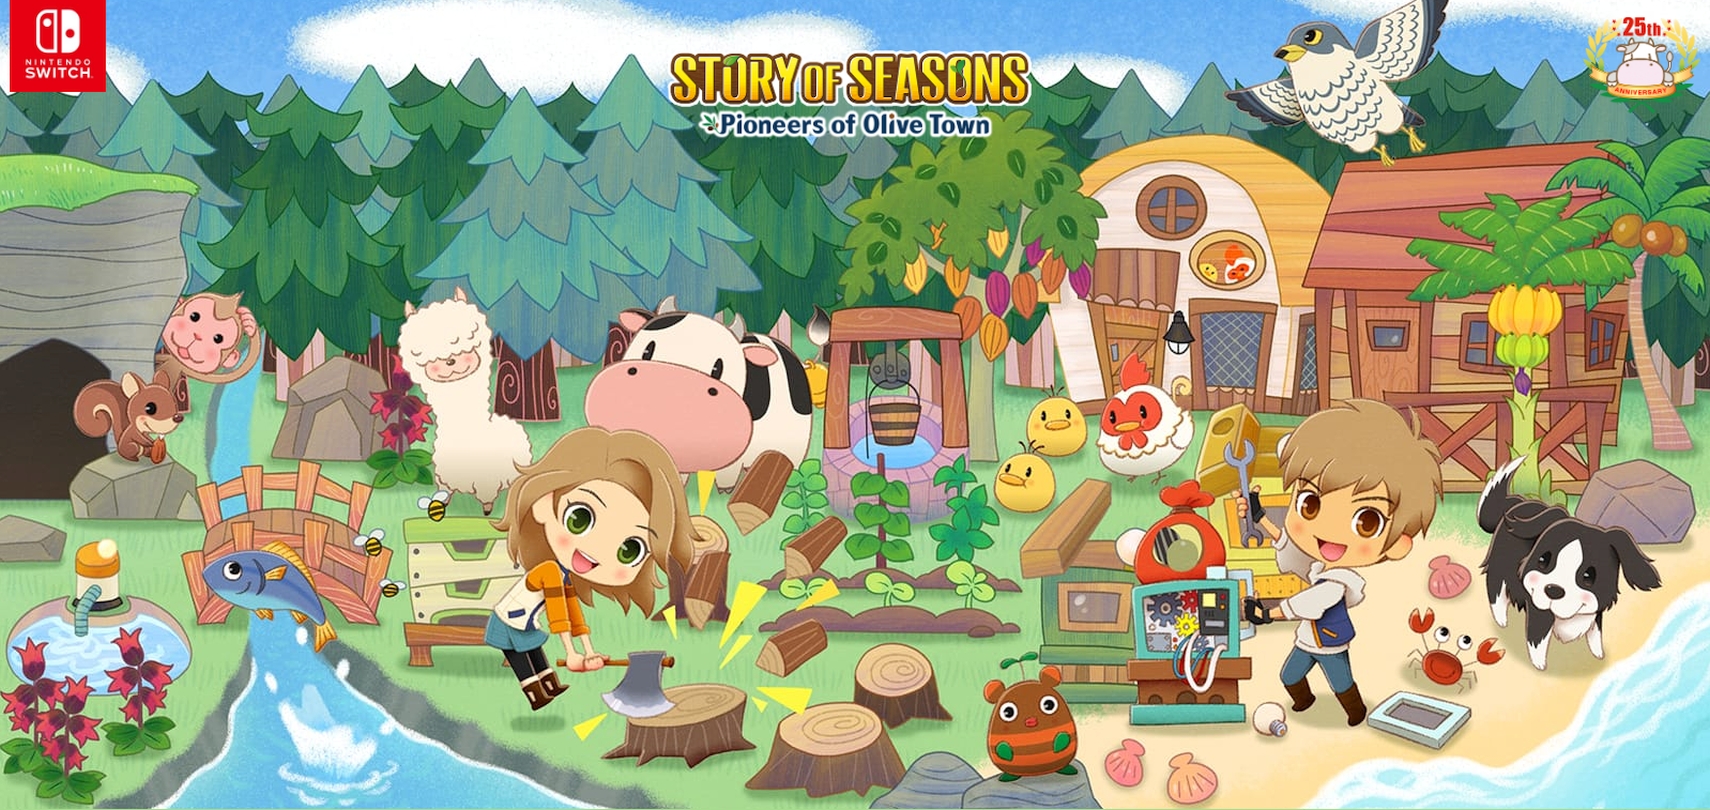 Story Of Seasons: Pioneers of Olive Town Announced For The Nintendo Switch in 2021